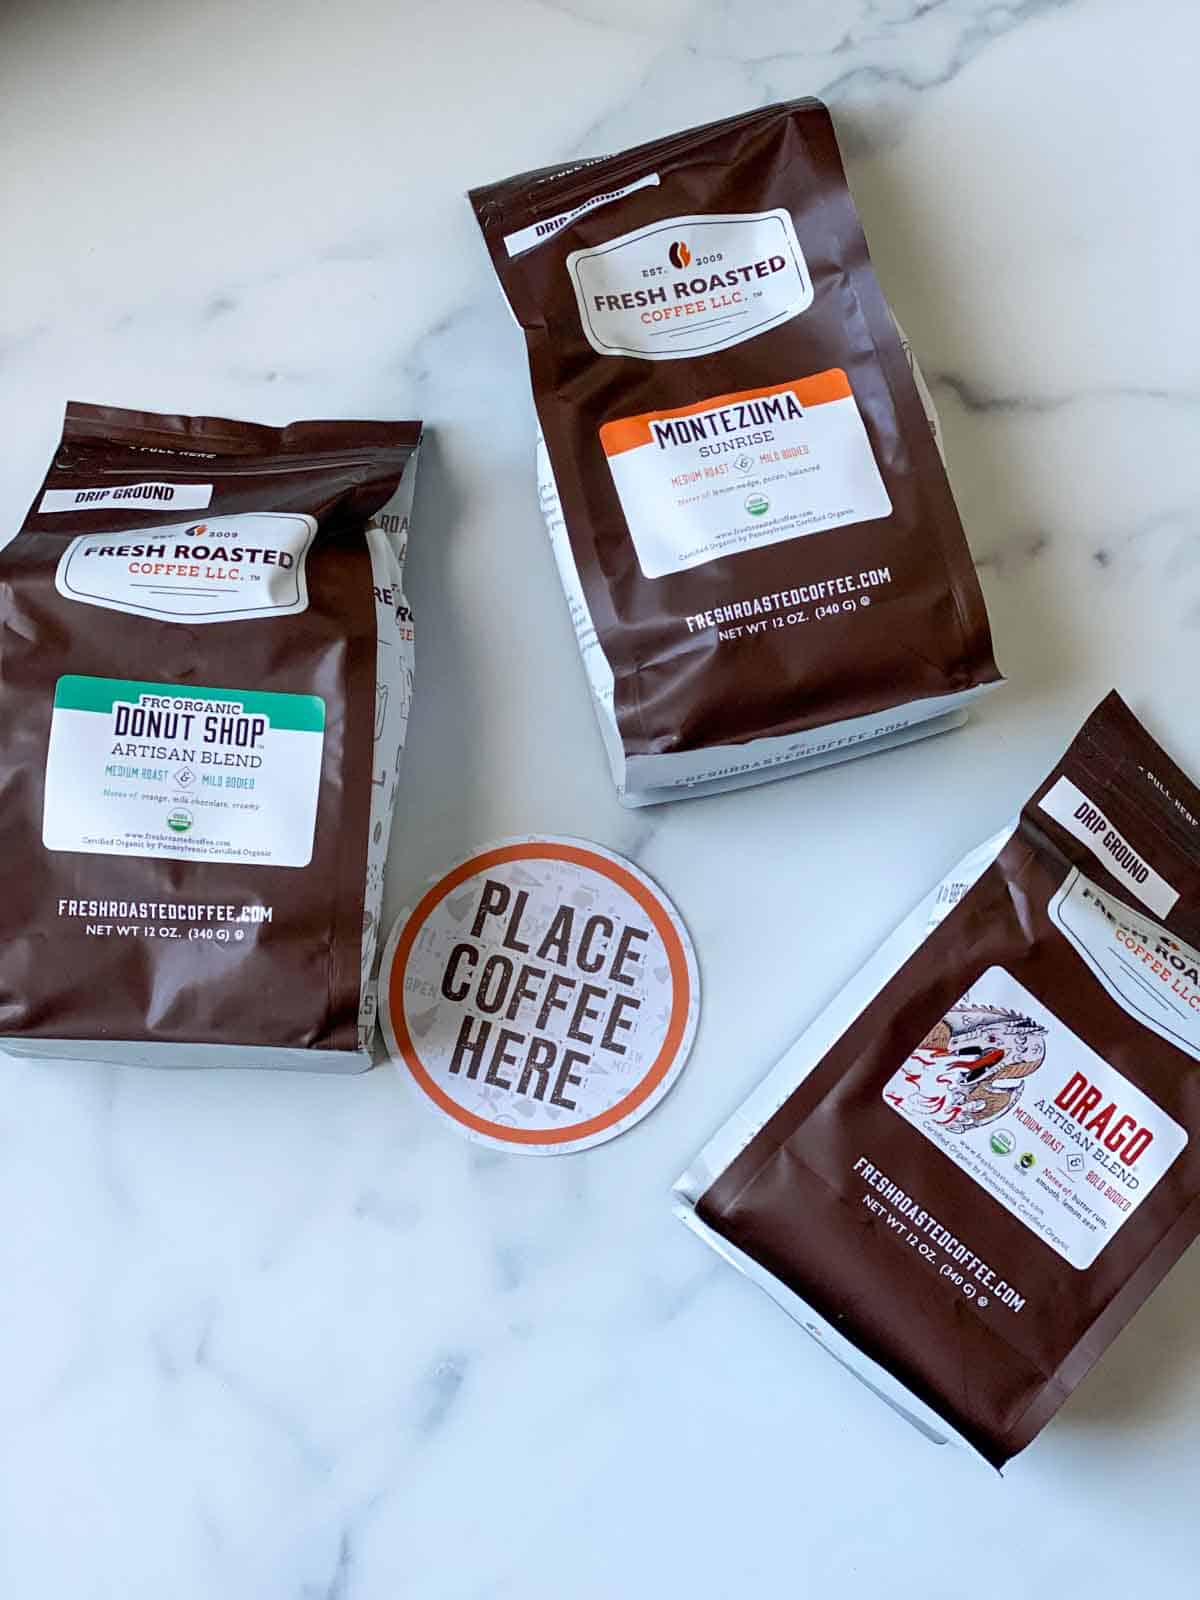 3 bags of fresh roasted coffee LLC with a "place coffee here" drink holder